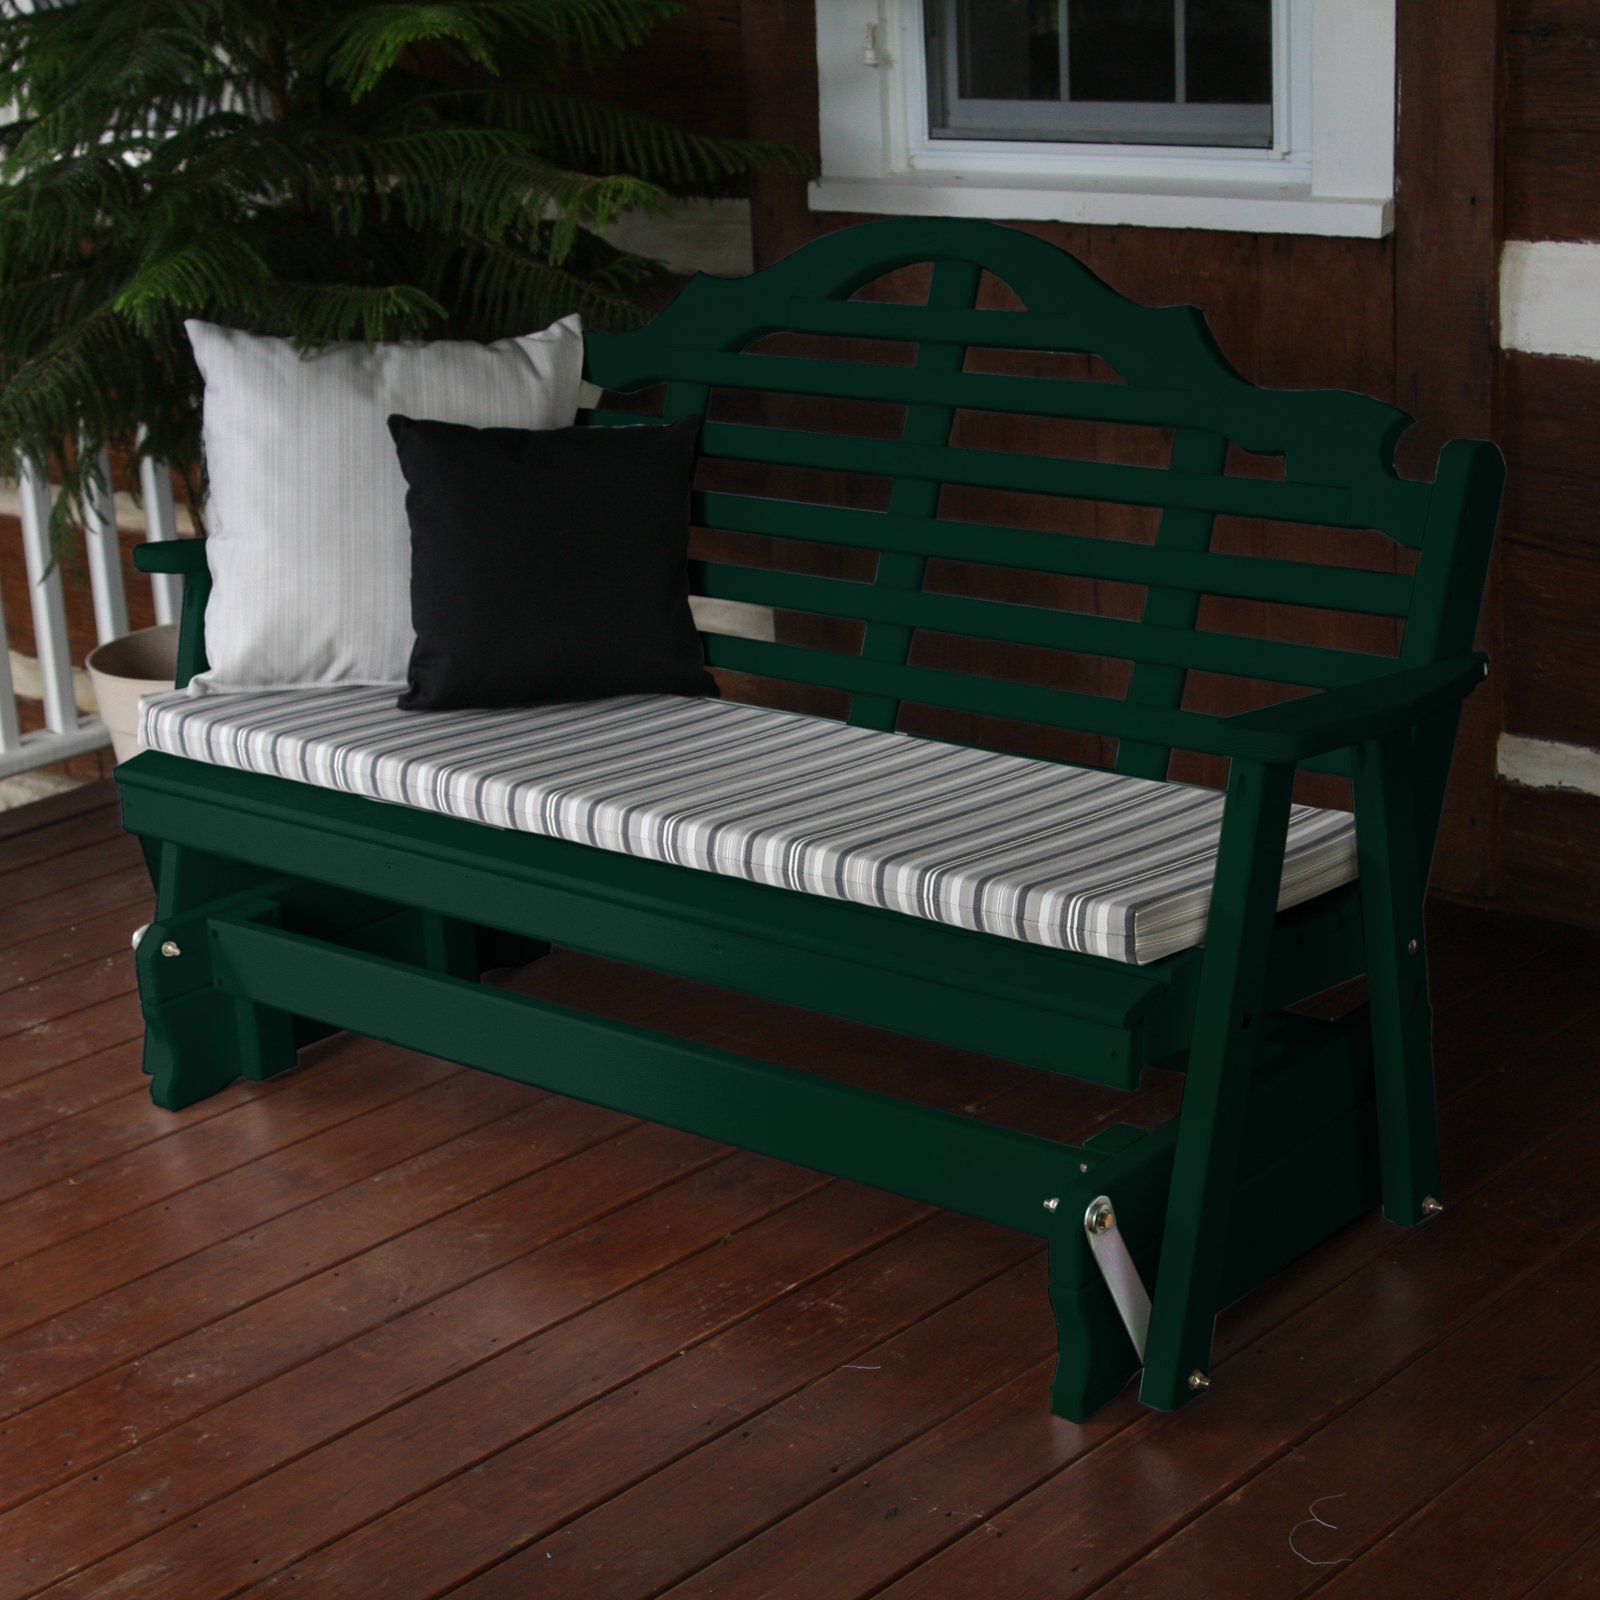 A & L Furniture Yellow Pine Marlboro Outdoor Bench Glider Within Most Recently Released Cedar Colonial Style Glider Benches (View 3 of 30)